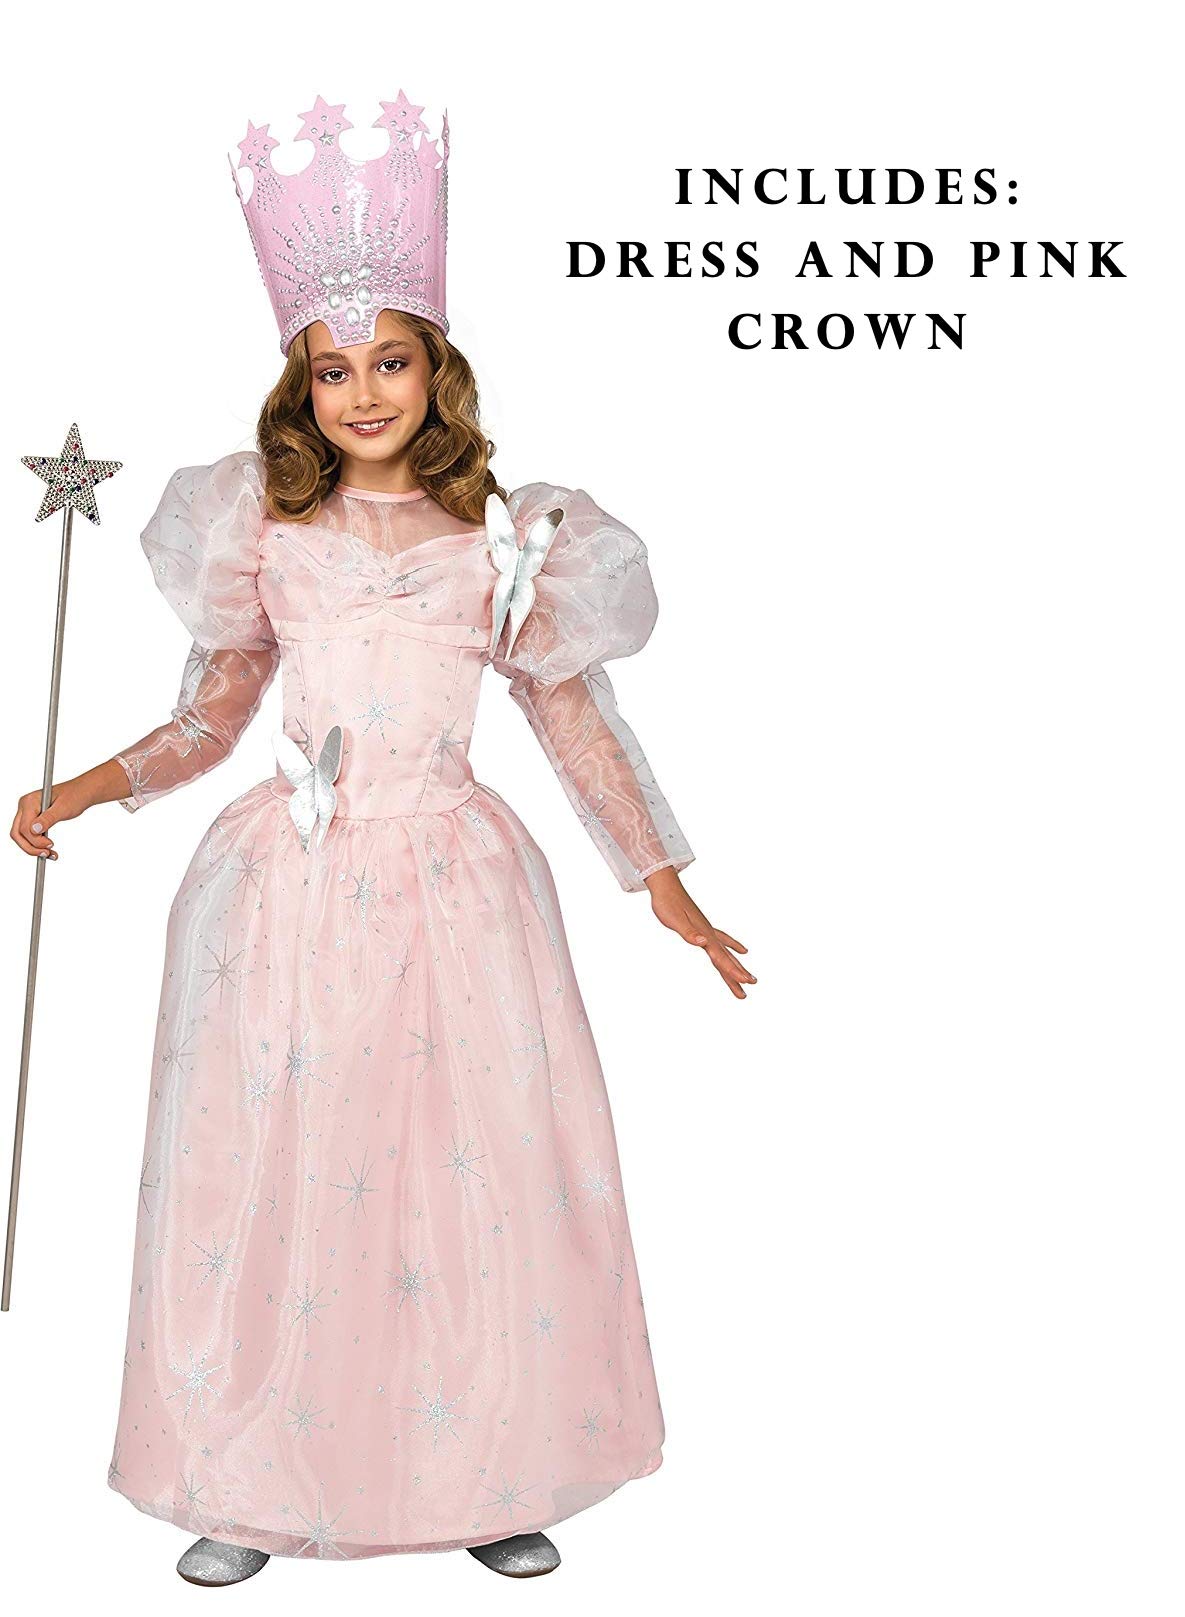 Rubie's Child's Wizard of Oz Deluxe Glinda The Good Witch Costume